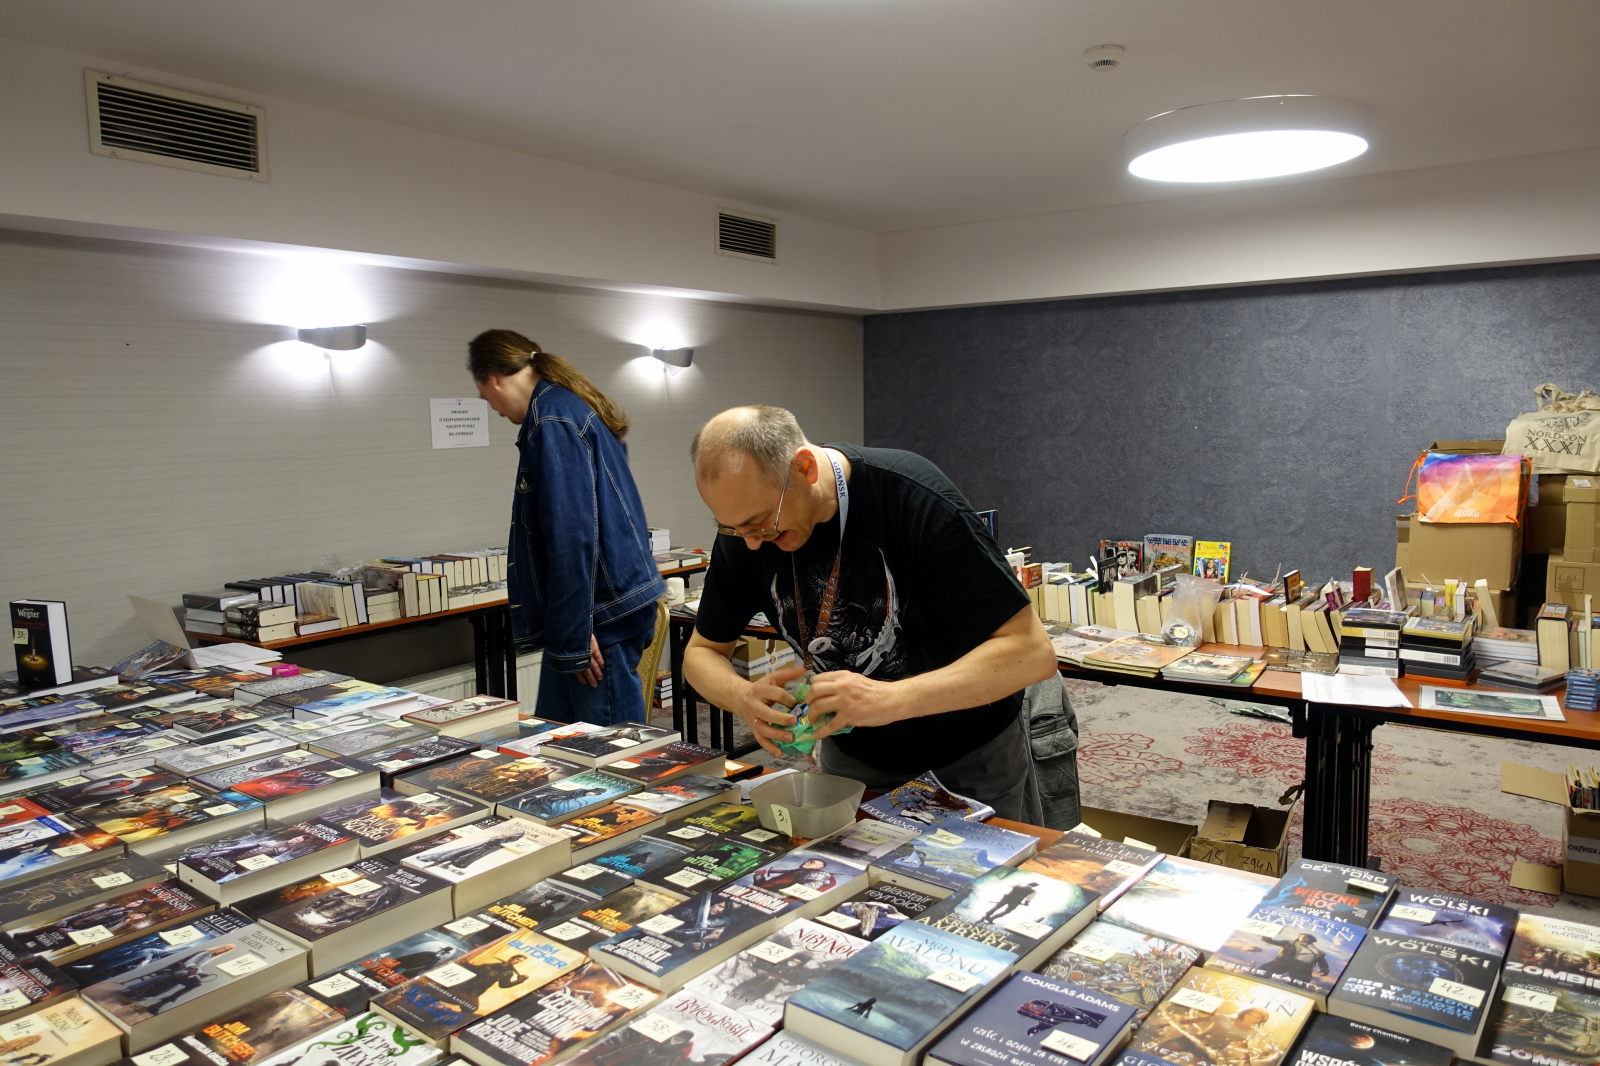 Big flat surface is covered with books. Behind it there is a man tearing the foil bag. In the background there is another man standing and there are two tables with books on them.